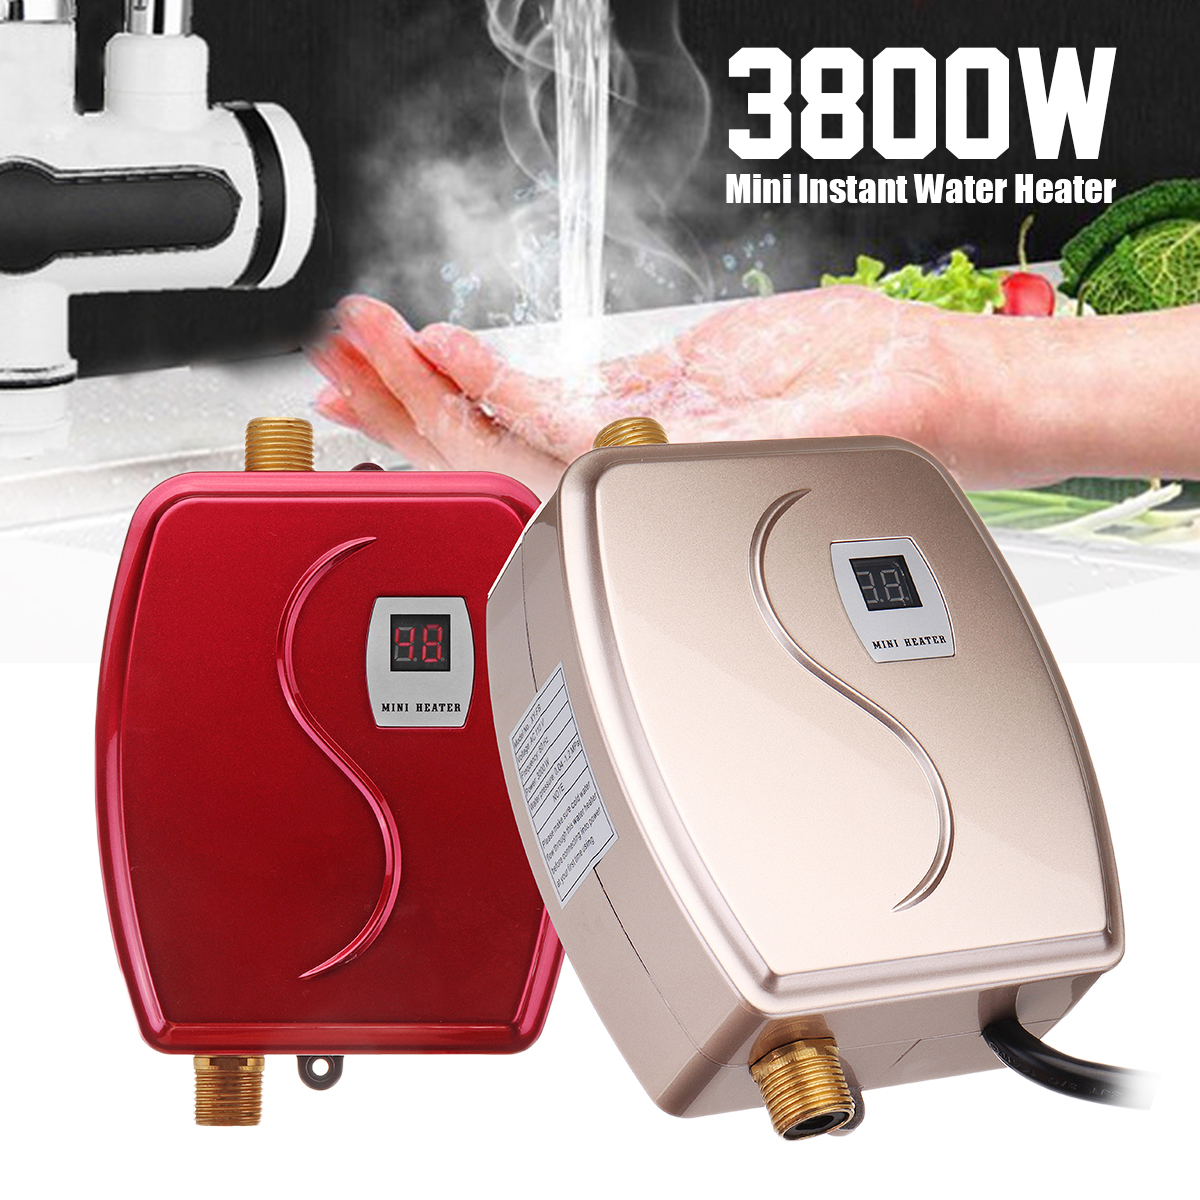 3800W-3000W-Mini-Tankless-Instant-Hot-Water-Heater-Faucet-kitchen-Heating-Thermostat-1366830-1